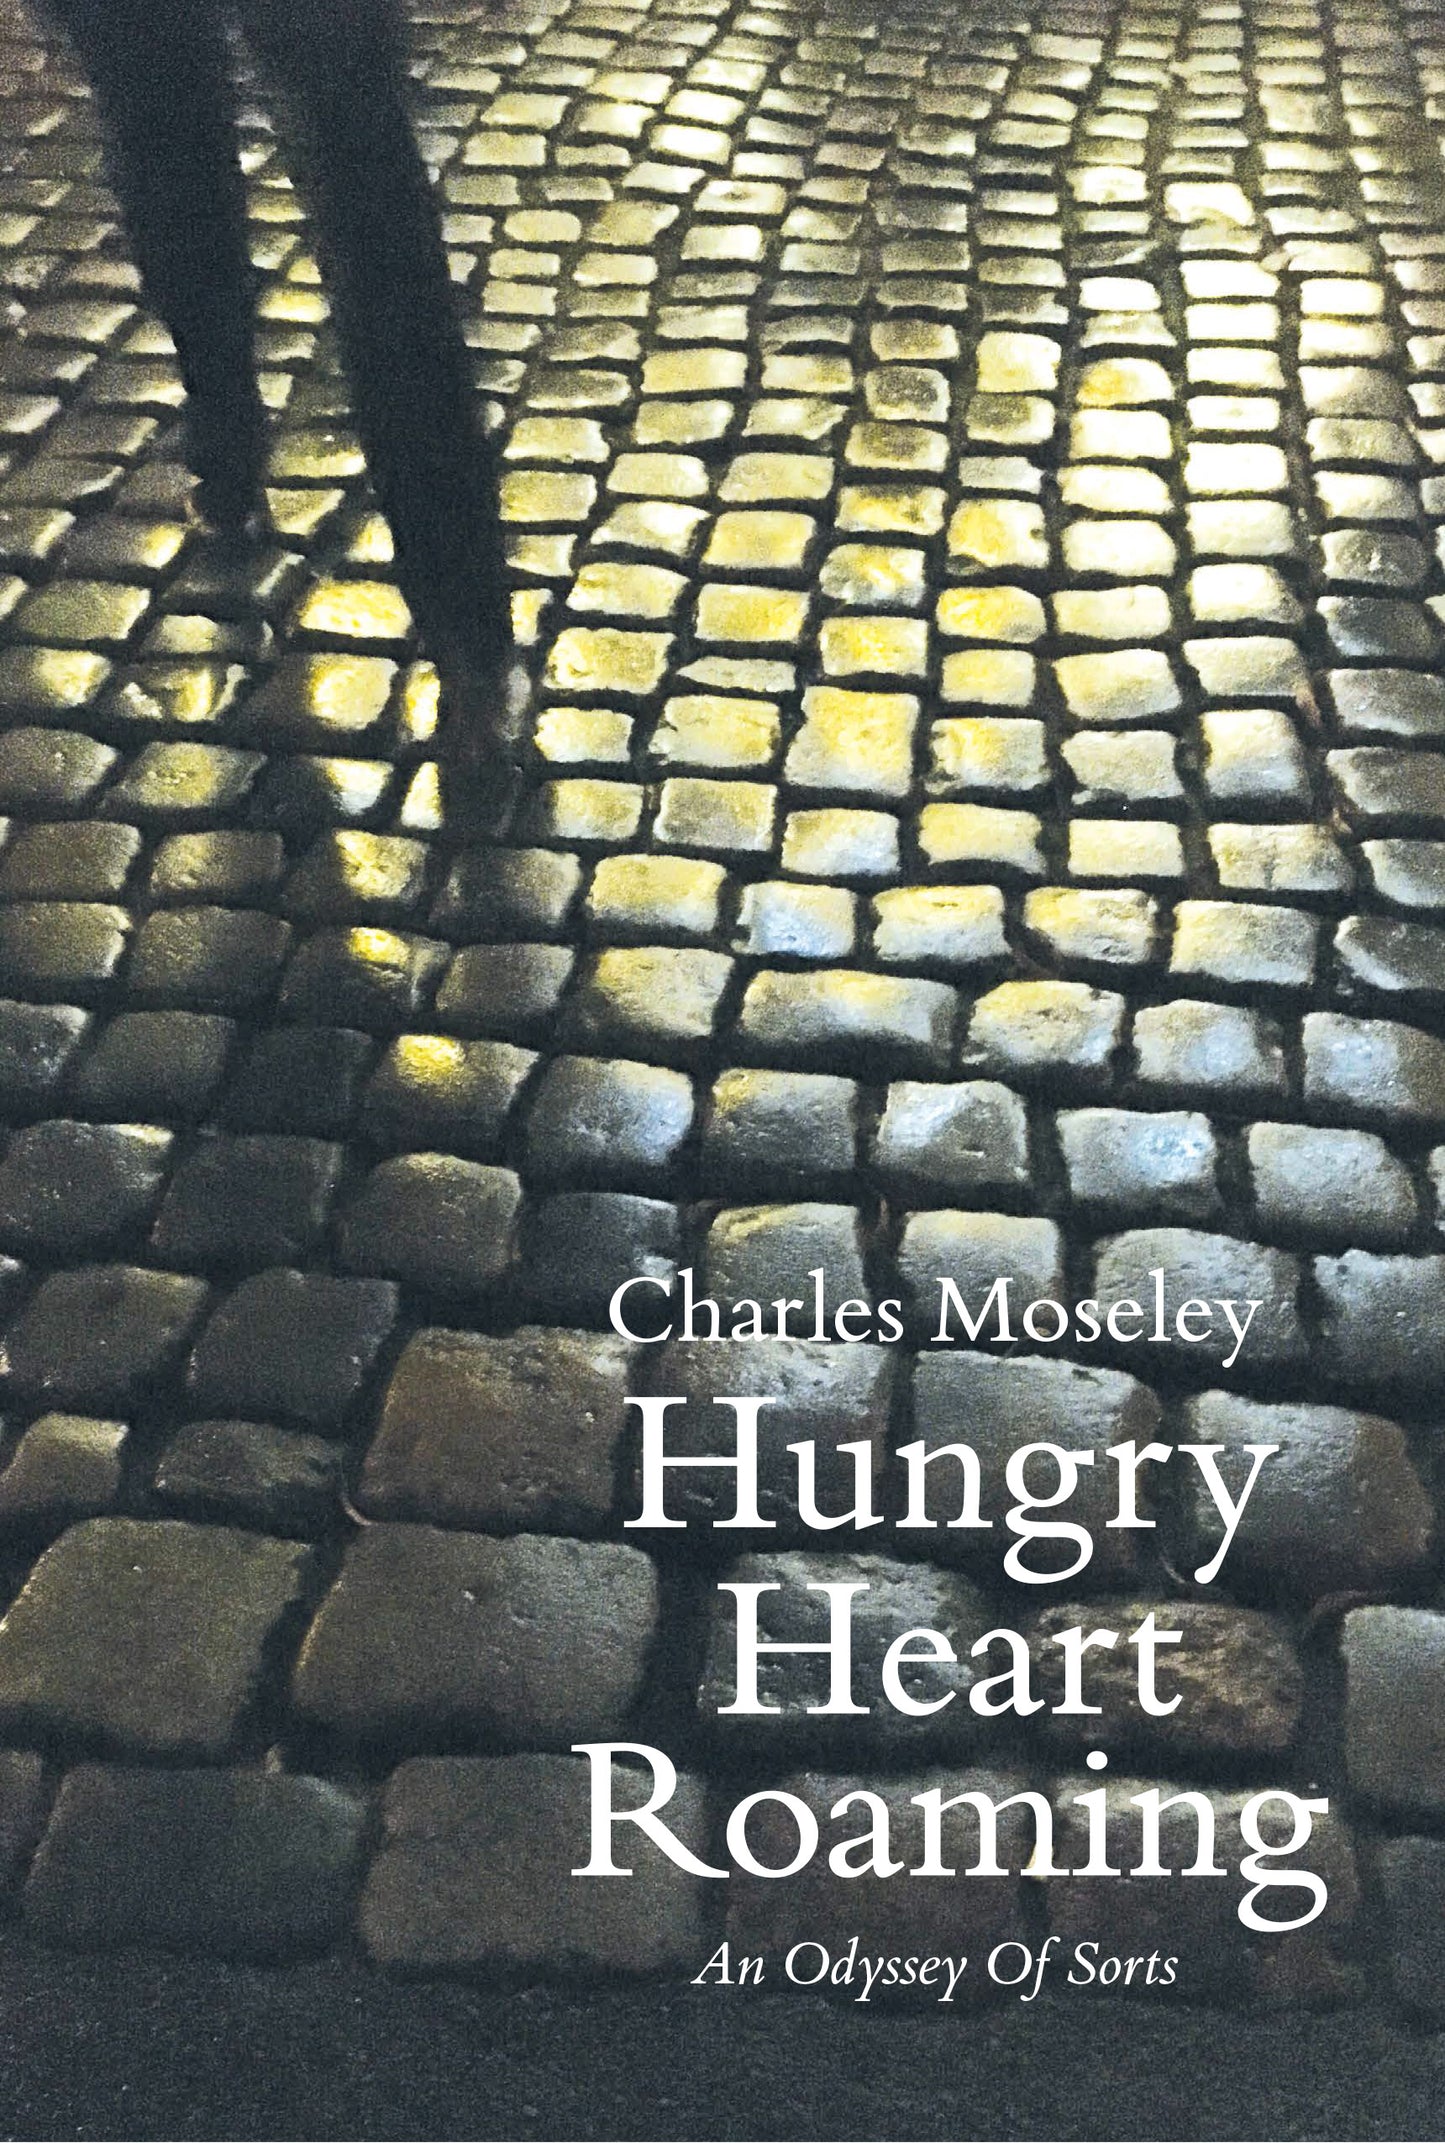 Hungry Heart Roaming - An Odyssey Of Sorts